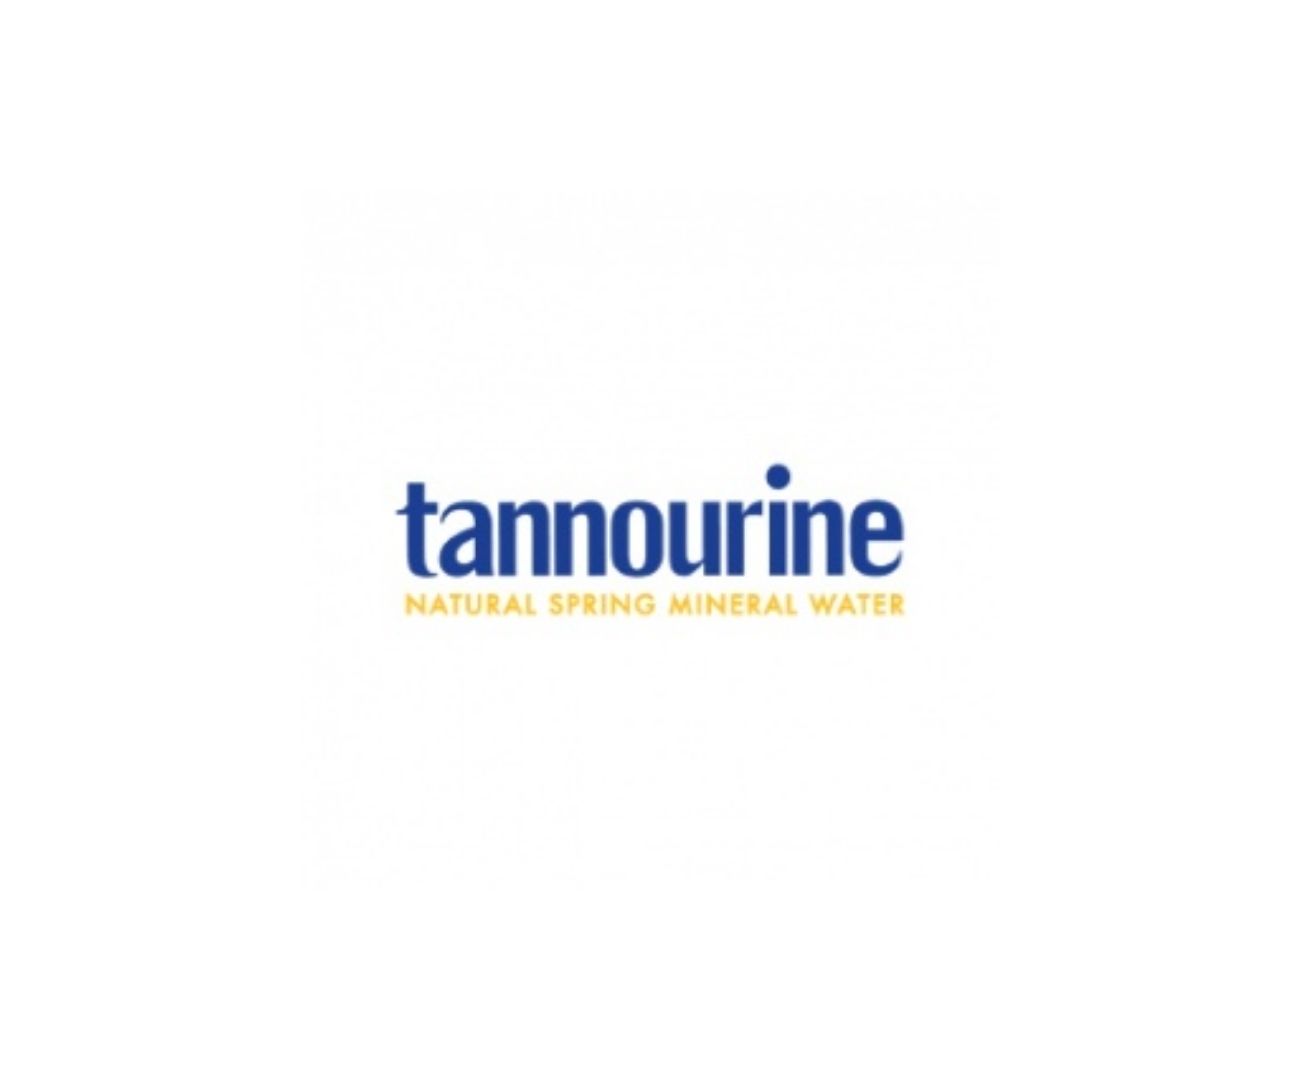 17-facts-about-tannourine